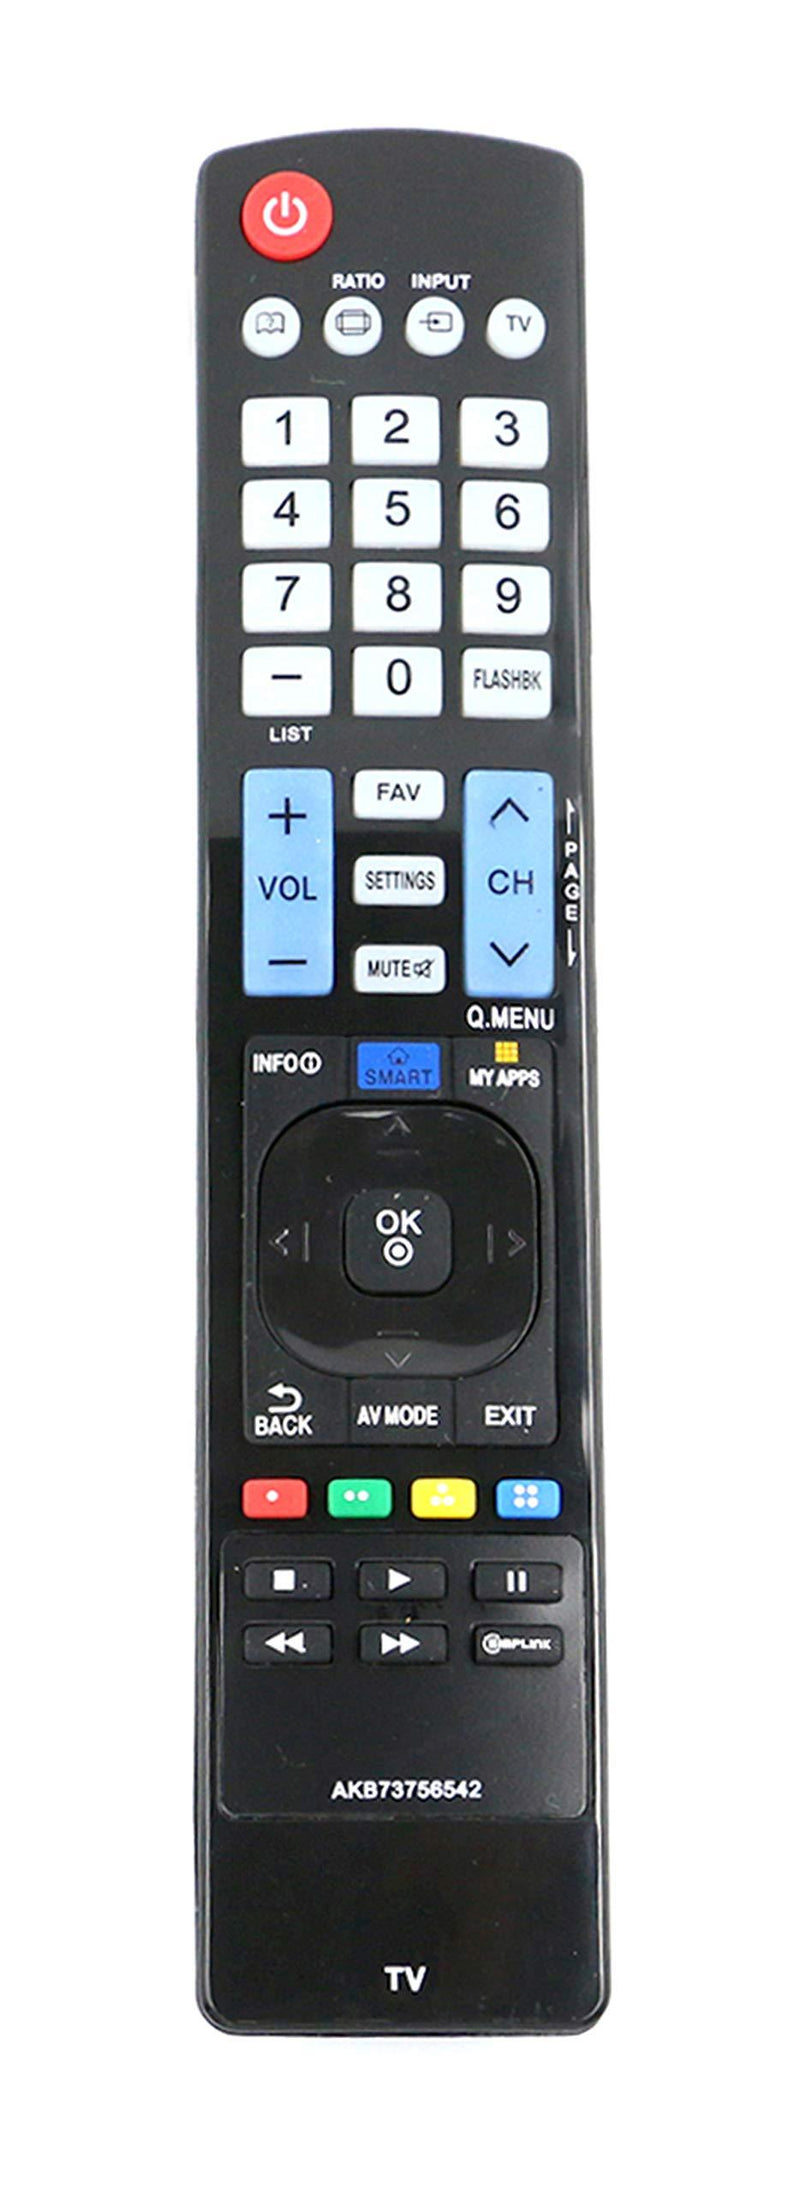 New AKB73756542 AKB73756567 Replace Remote fit for LG Smart TV 32LN570B 32LN5750 39LN5700 42LN5700 47LN5600 47LN5700 47LN5710 50LN5700 55LN5600UI 55LN5700 60LN5600UB 60LN5700 60LN5710 AGF76692608